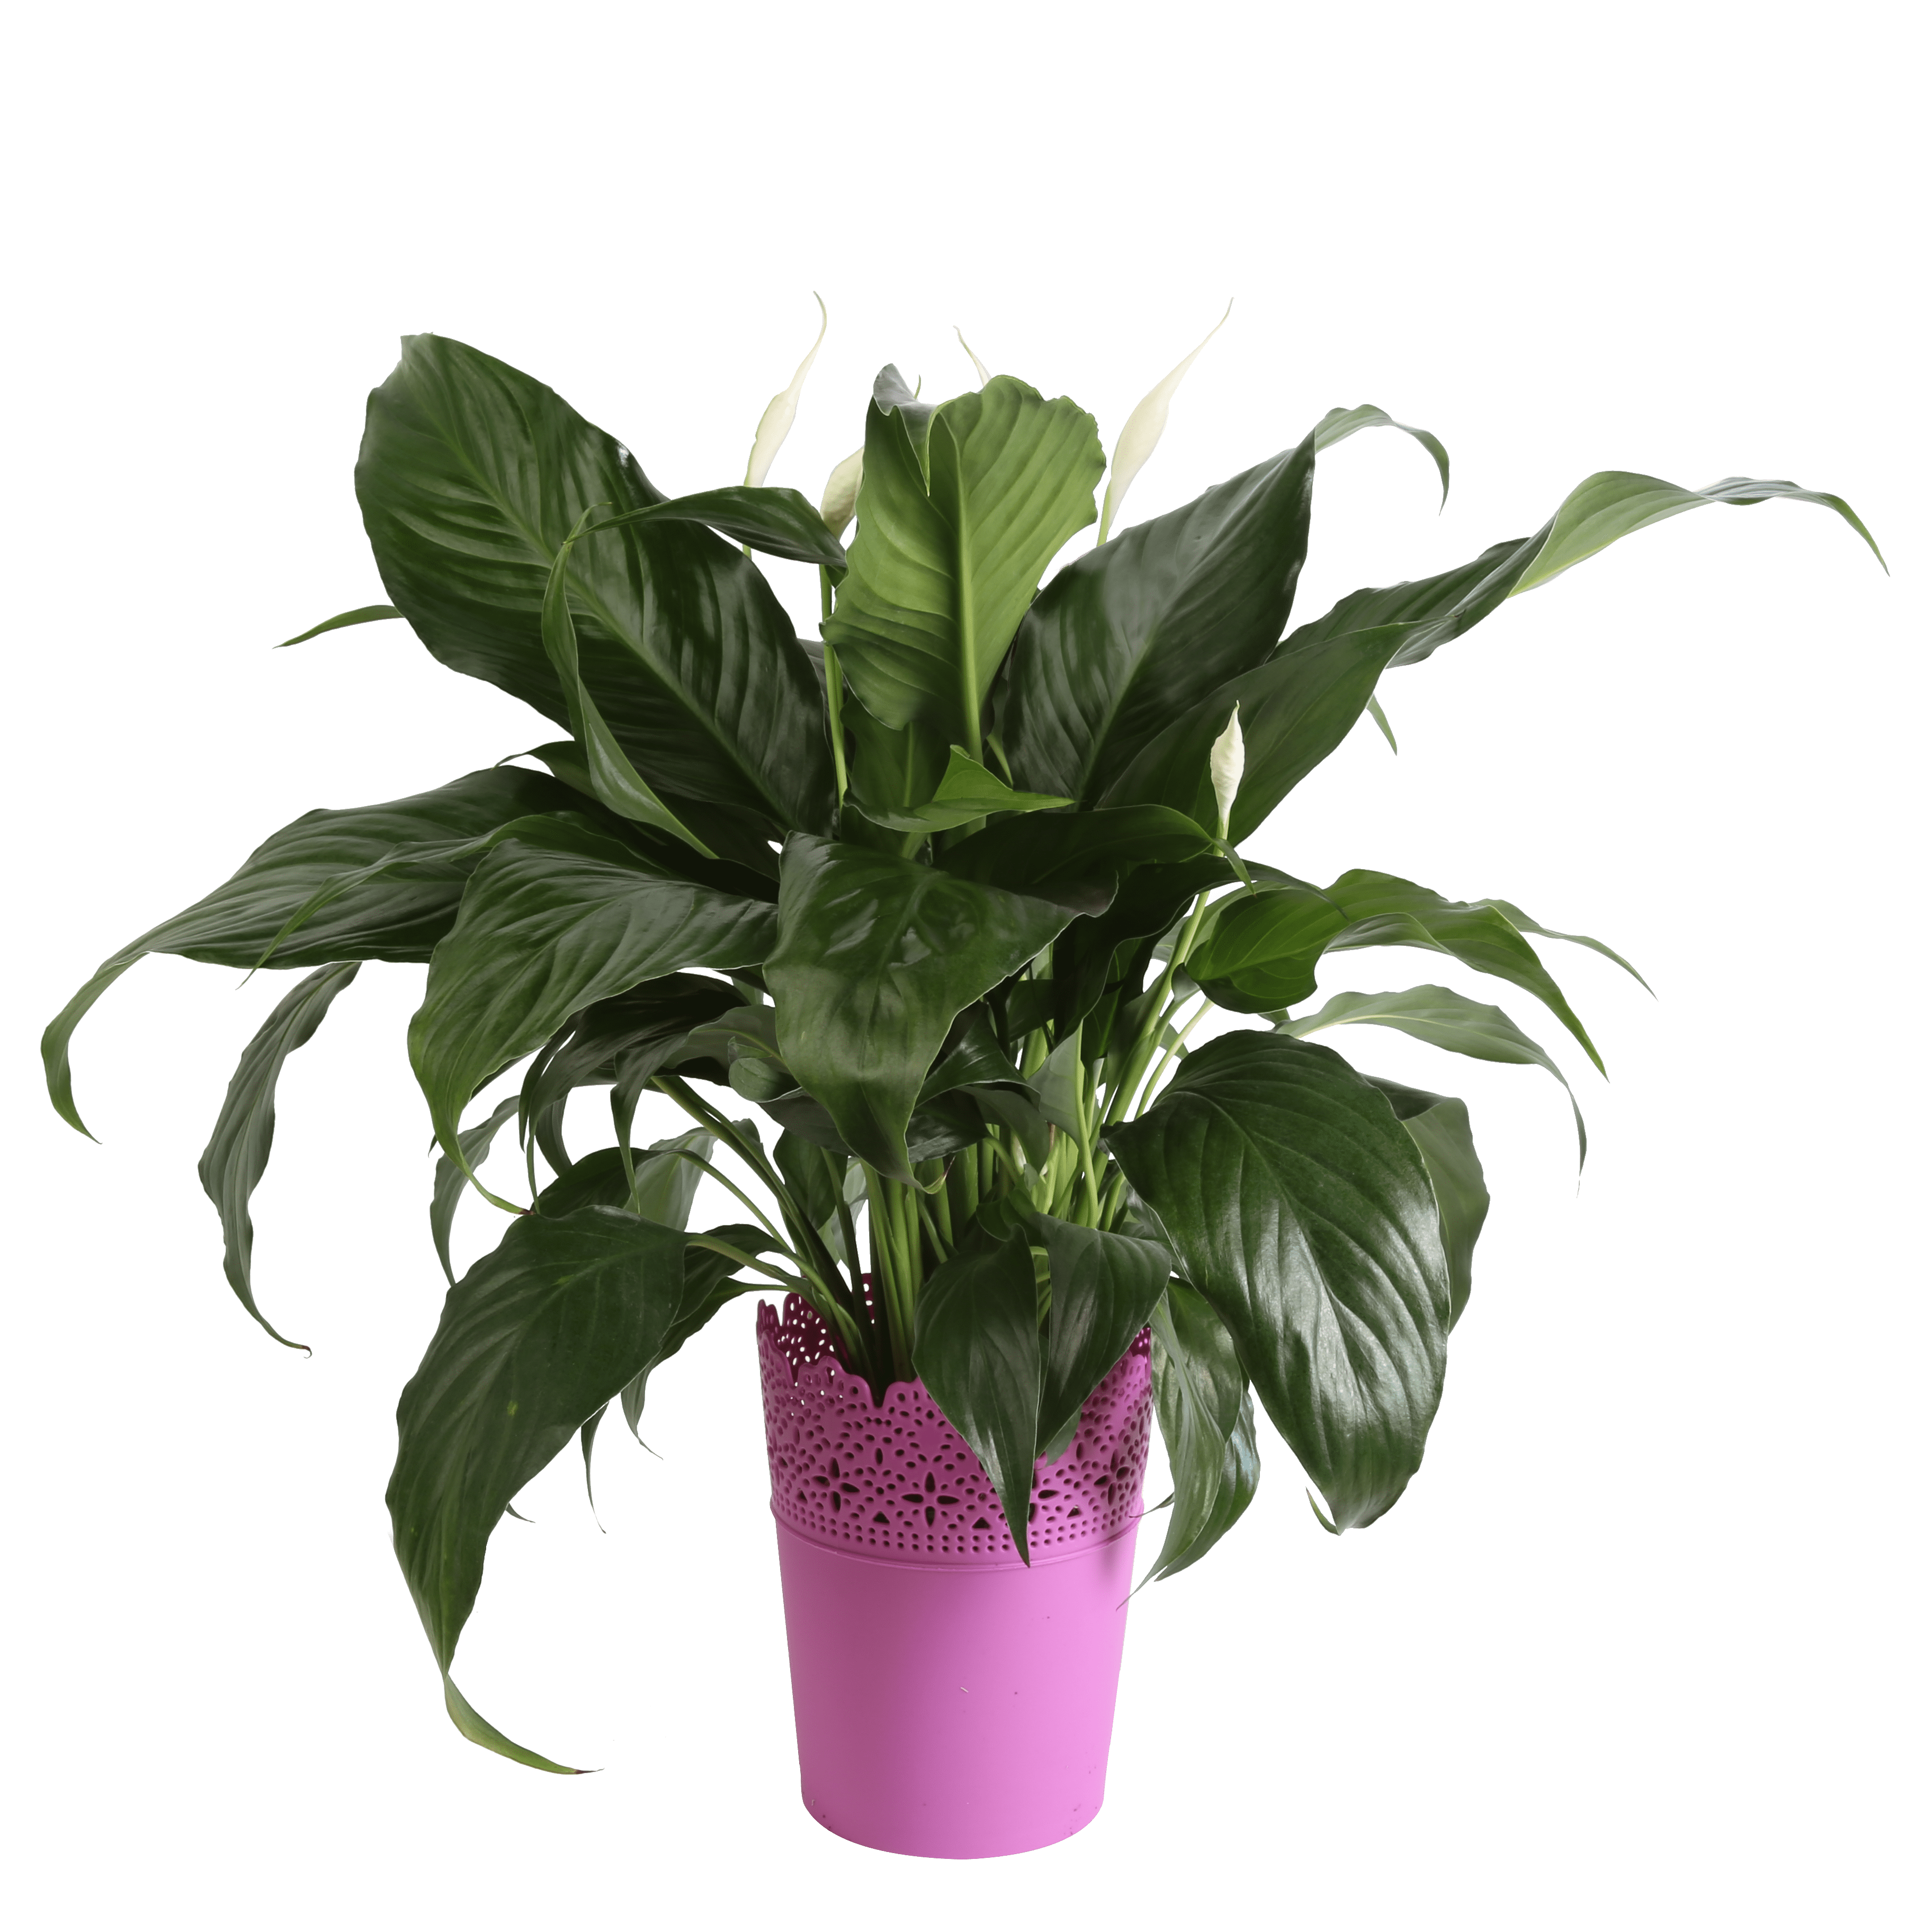 costa farms live indoor 15in. peace lily, decor pot